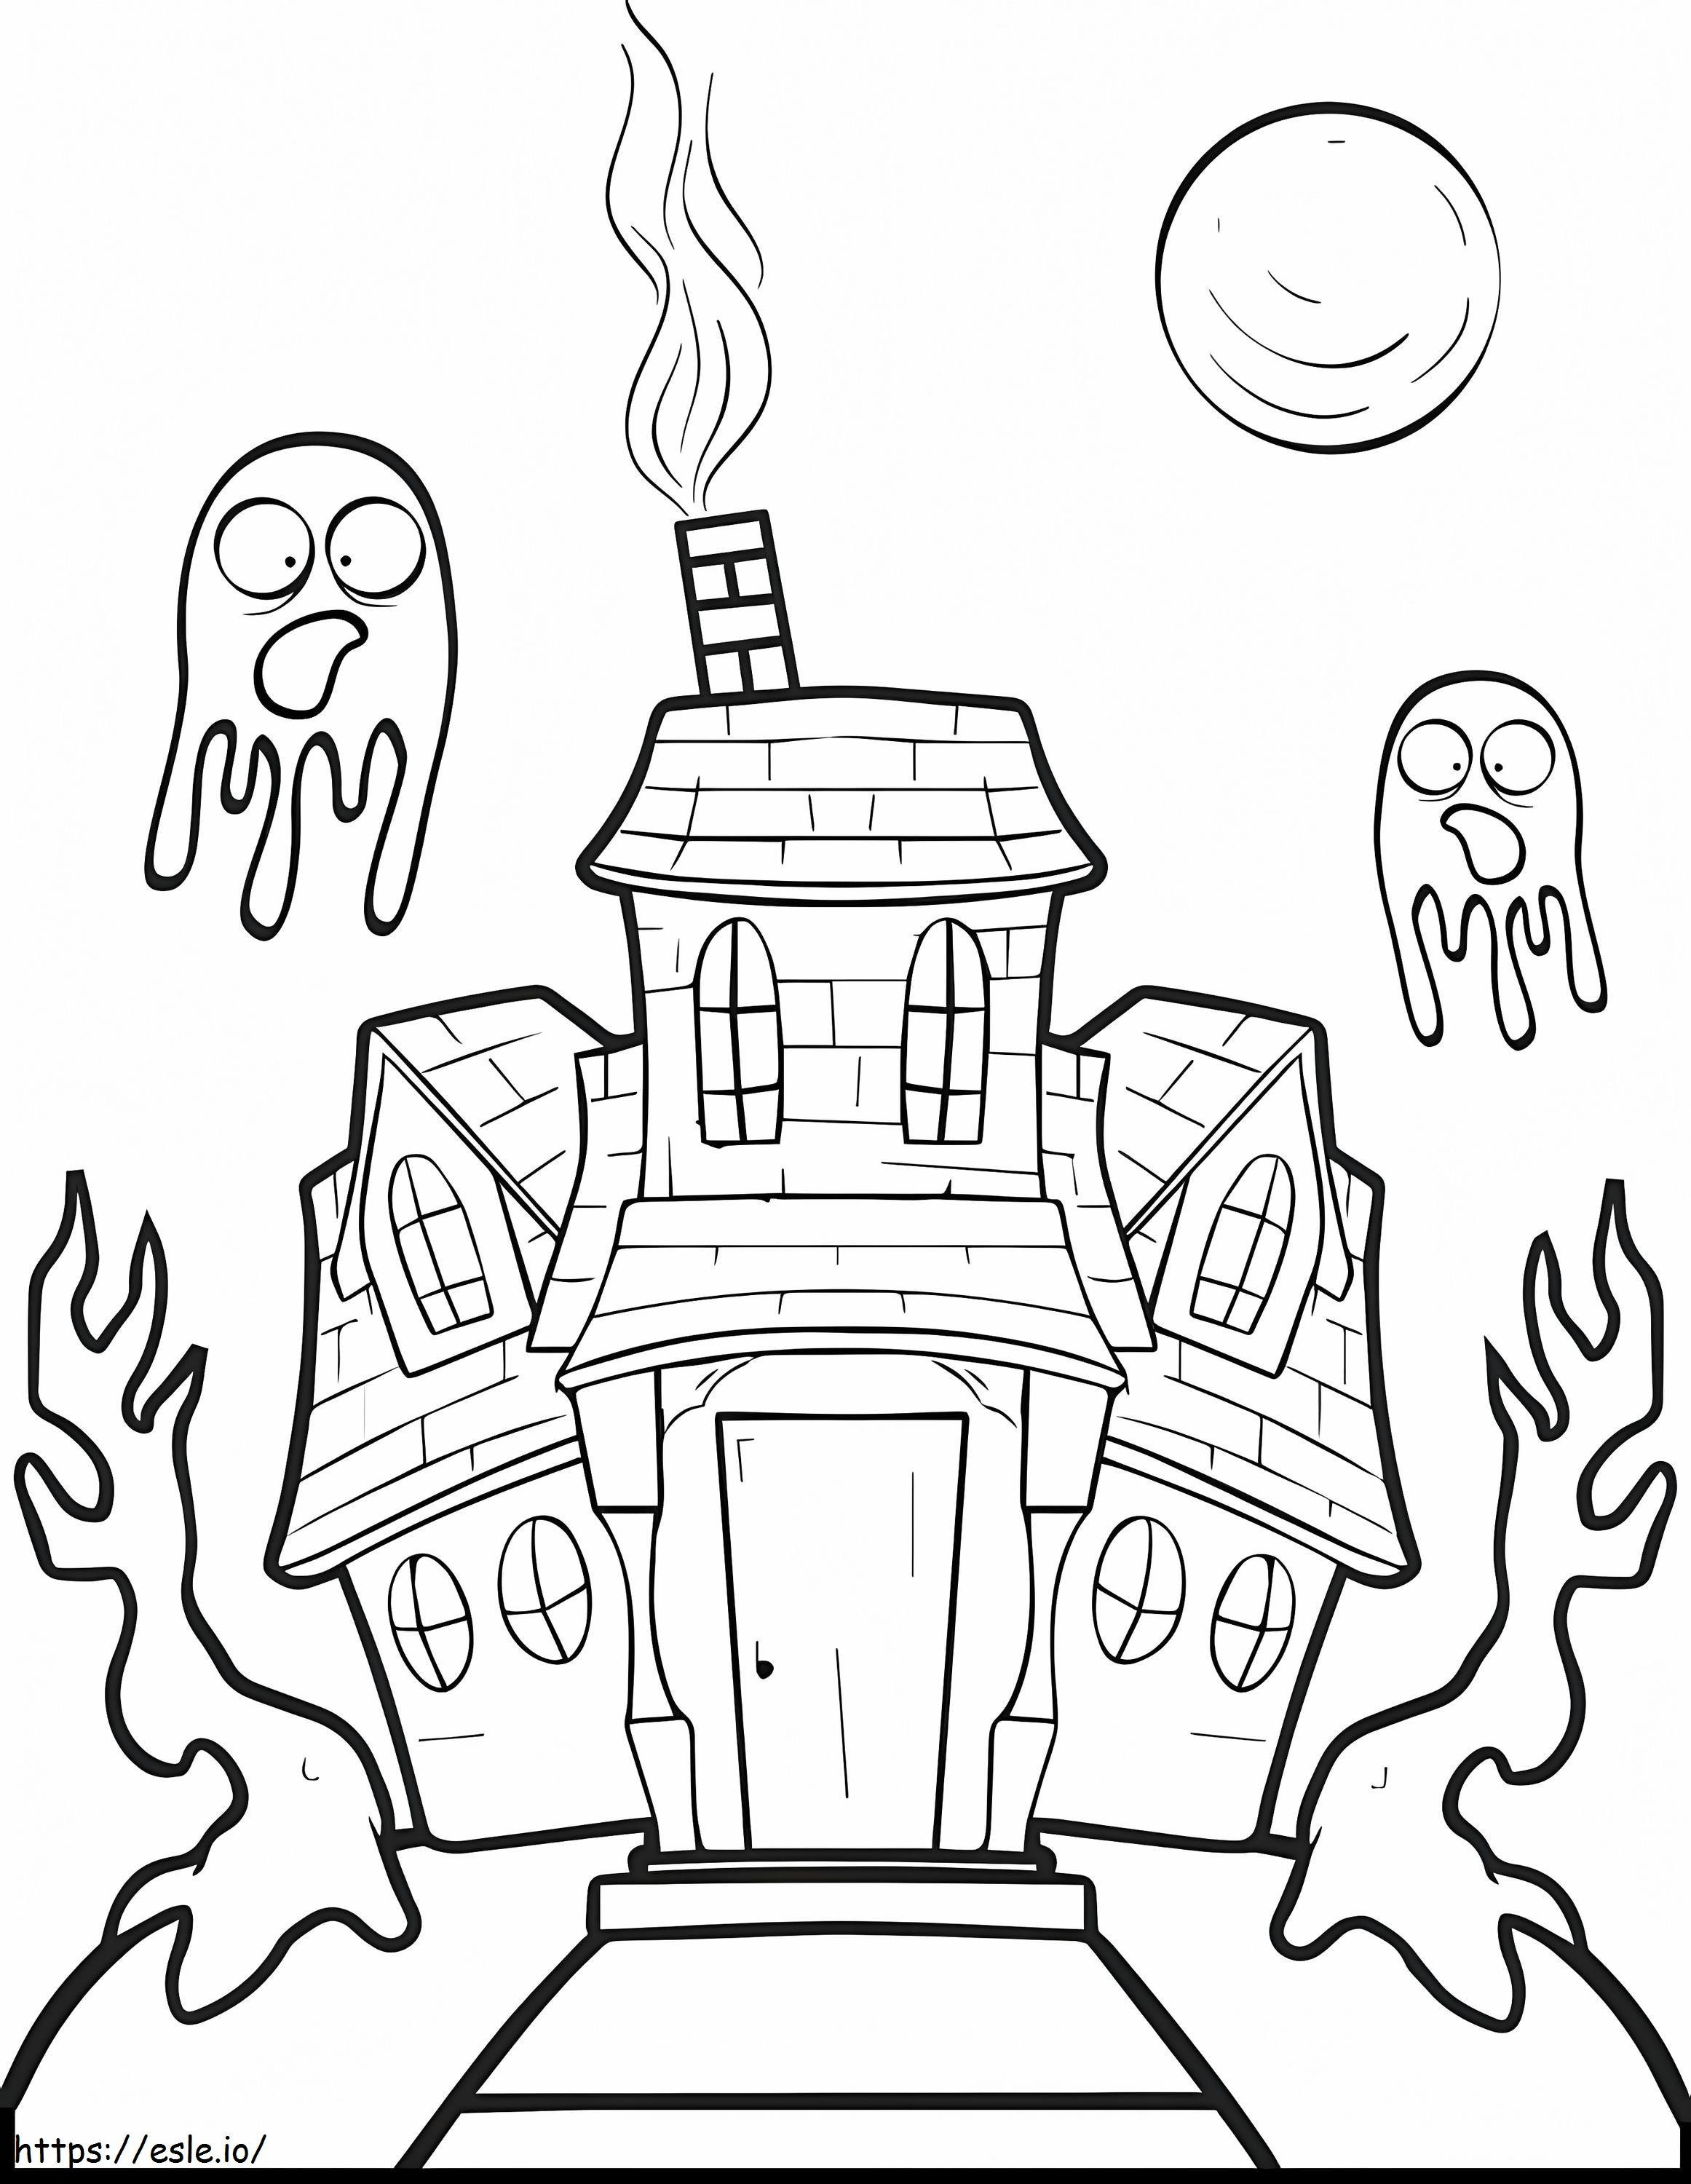 Maison Hantee Dhalloween 1 coloring page